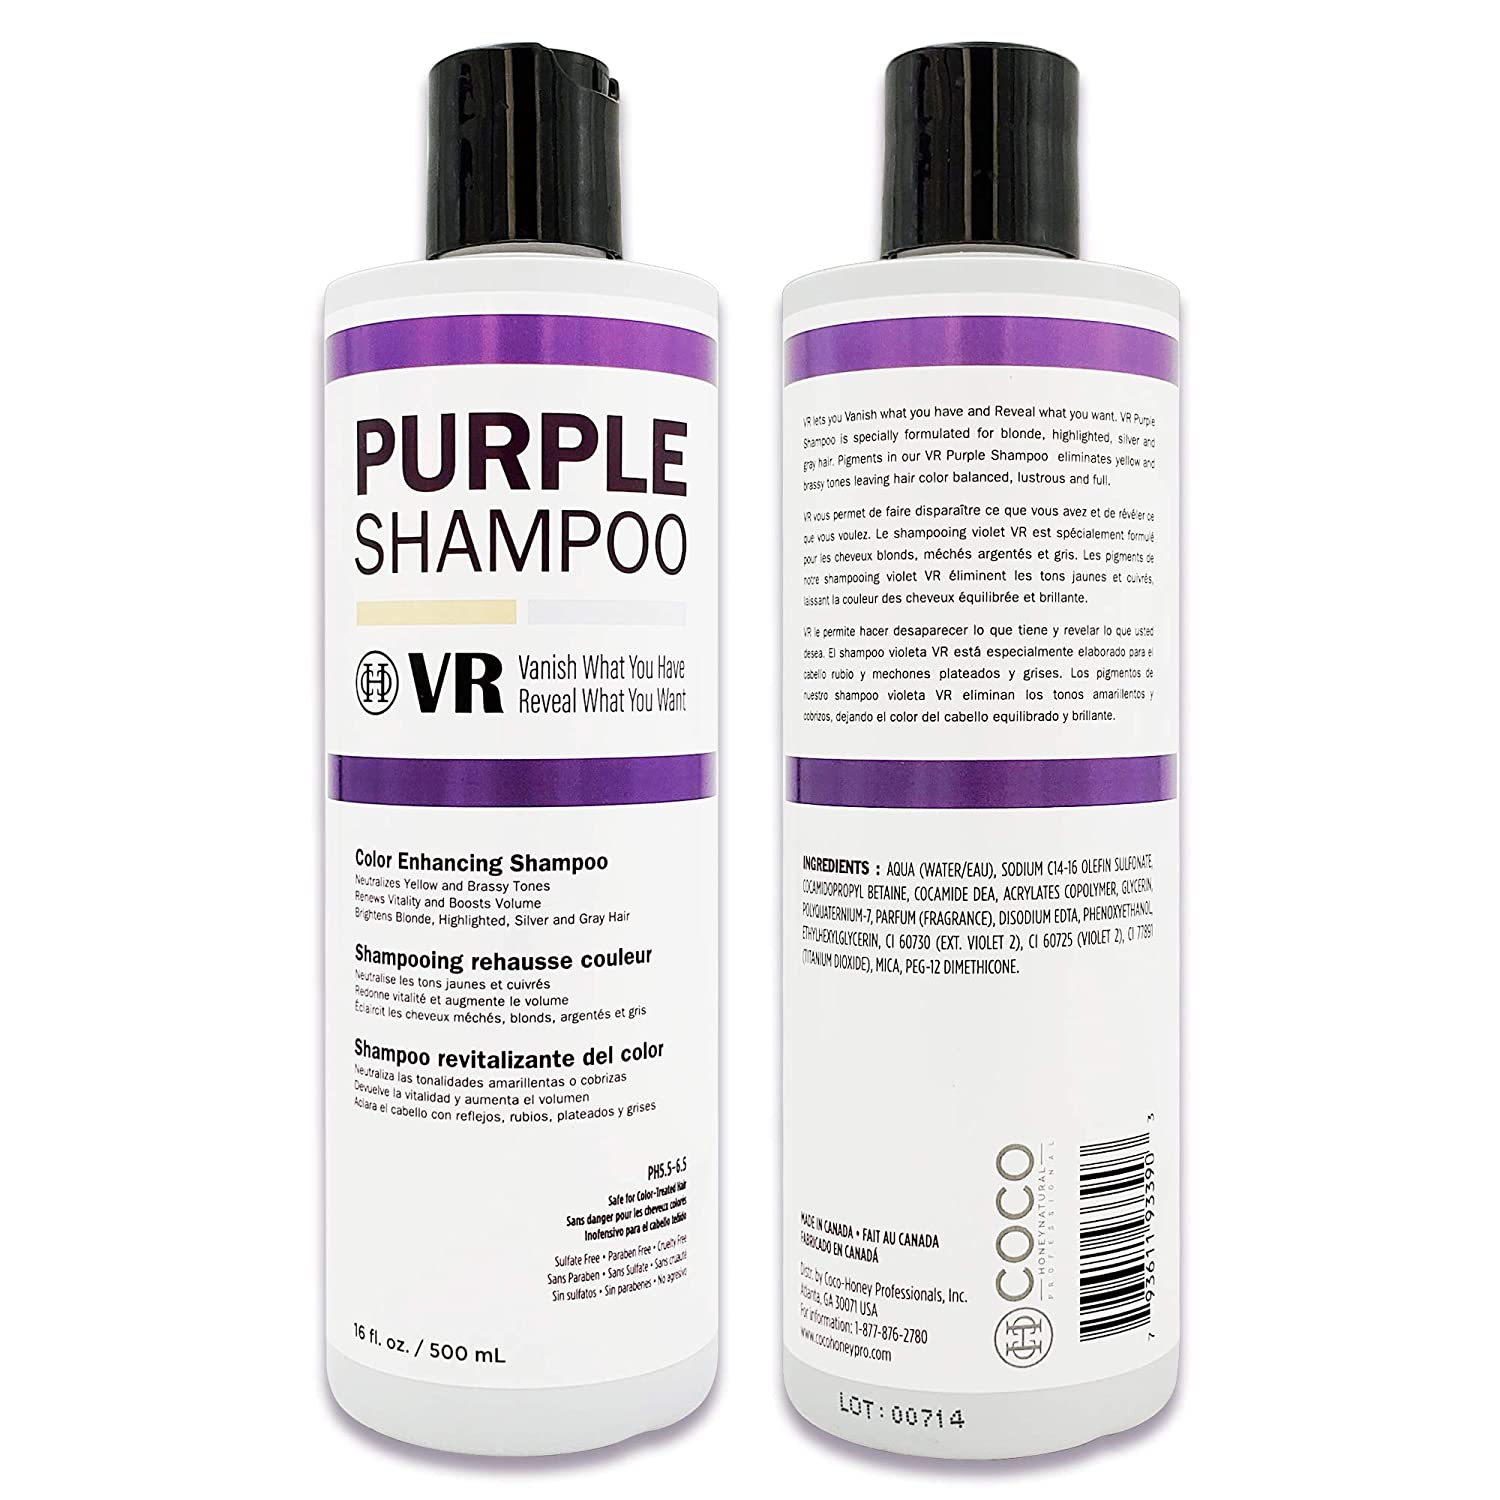 COCO-HONEY Cocohoney VR Color Enhancing Purple Shampoo for Blonde, Highlighted, Silver and Gray Hair 16 Oz. Find Your New Look Today!